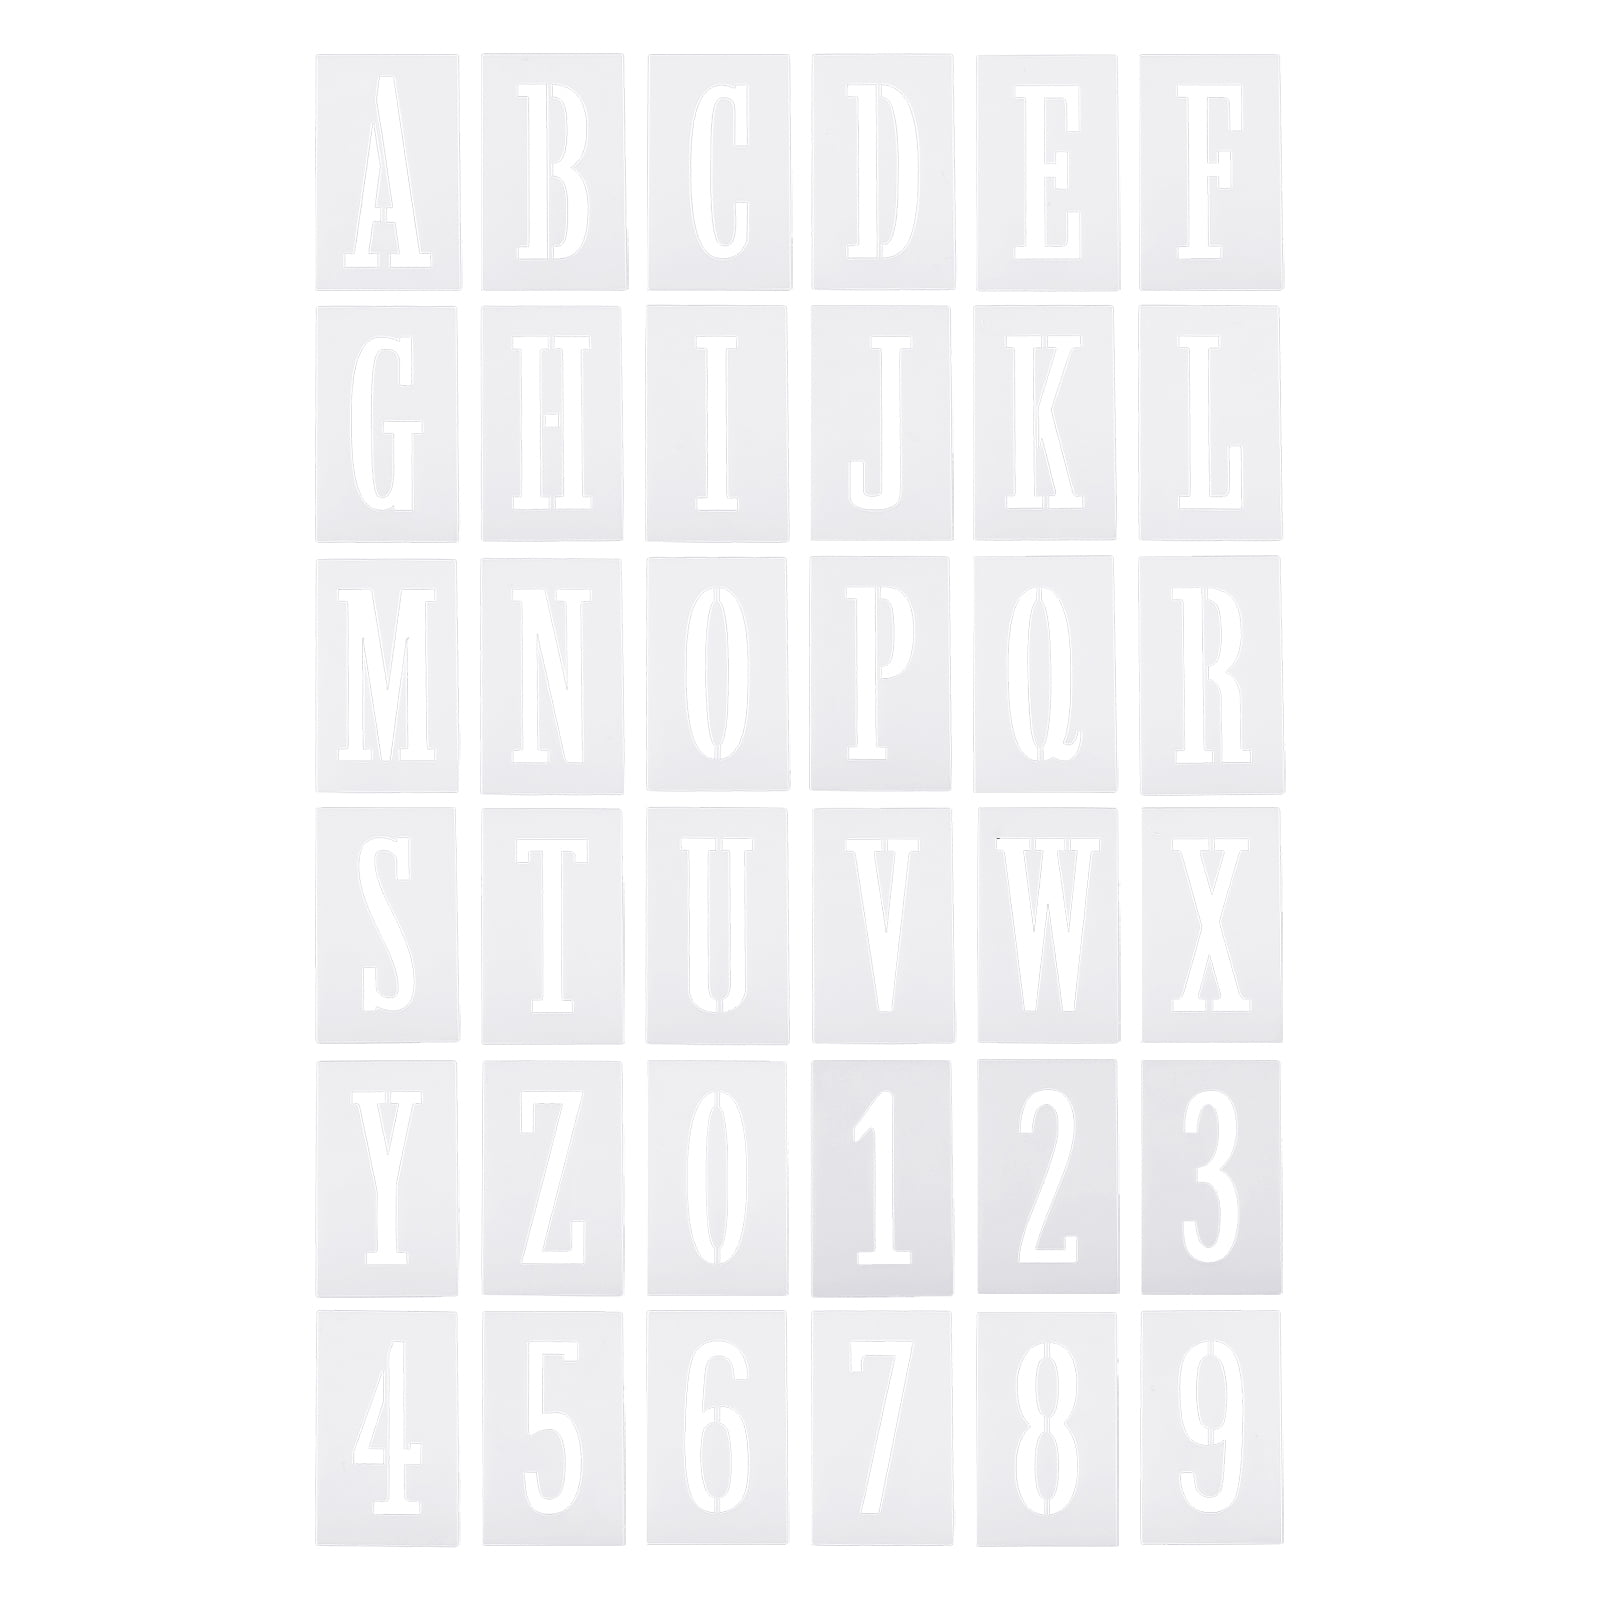 Uxcell 3 inch Letter Number Stencils 3.2 inch Width Reusable Alphabet Numbers Symbol Templates Set with Ring, White 42 Pack